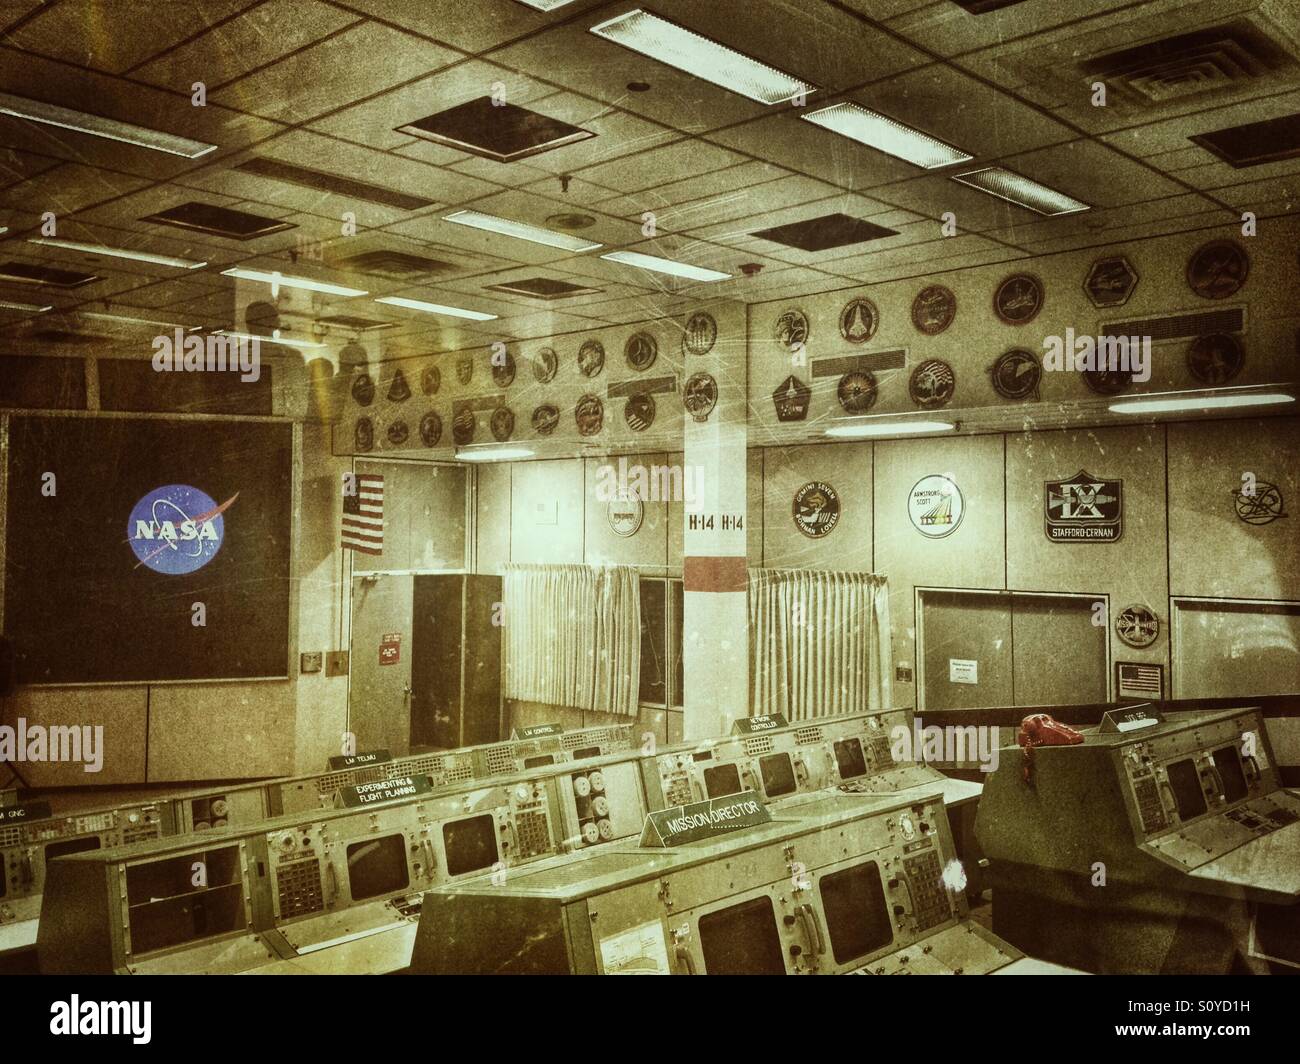 History making - Appolo 11 Mission Control Center Stock Photo